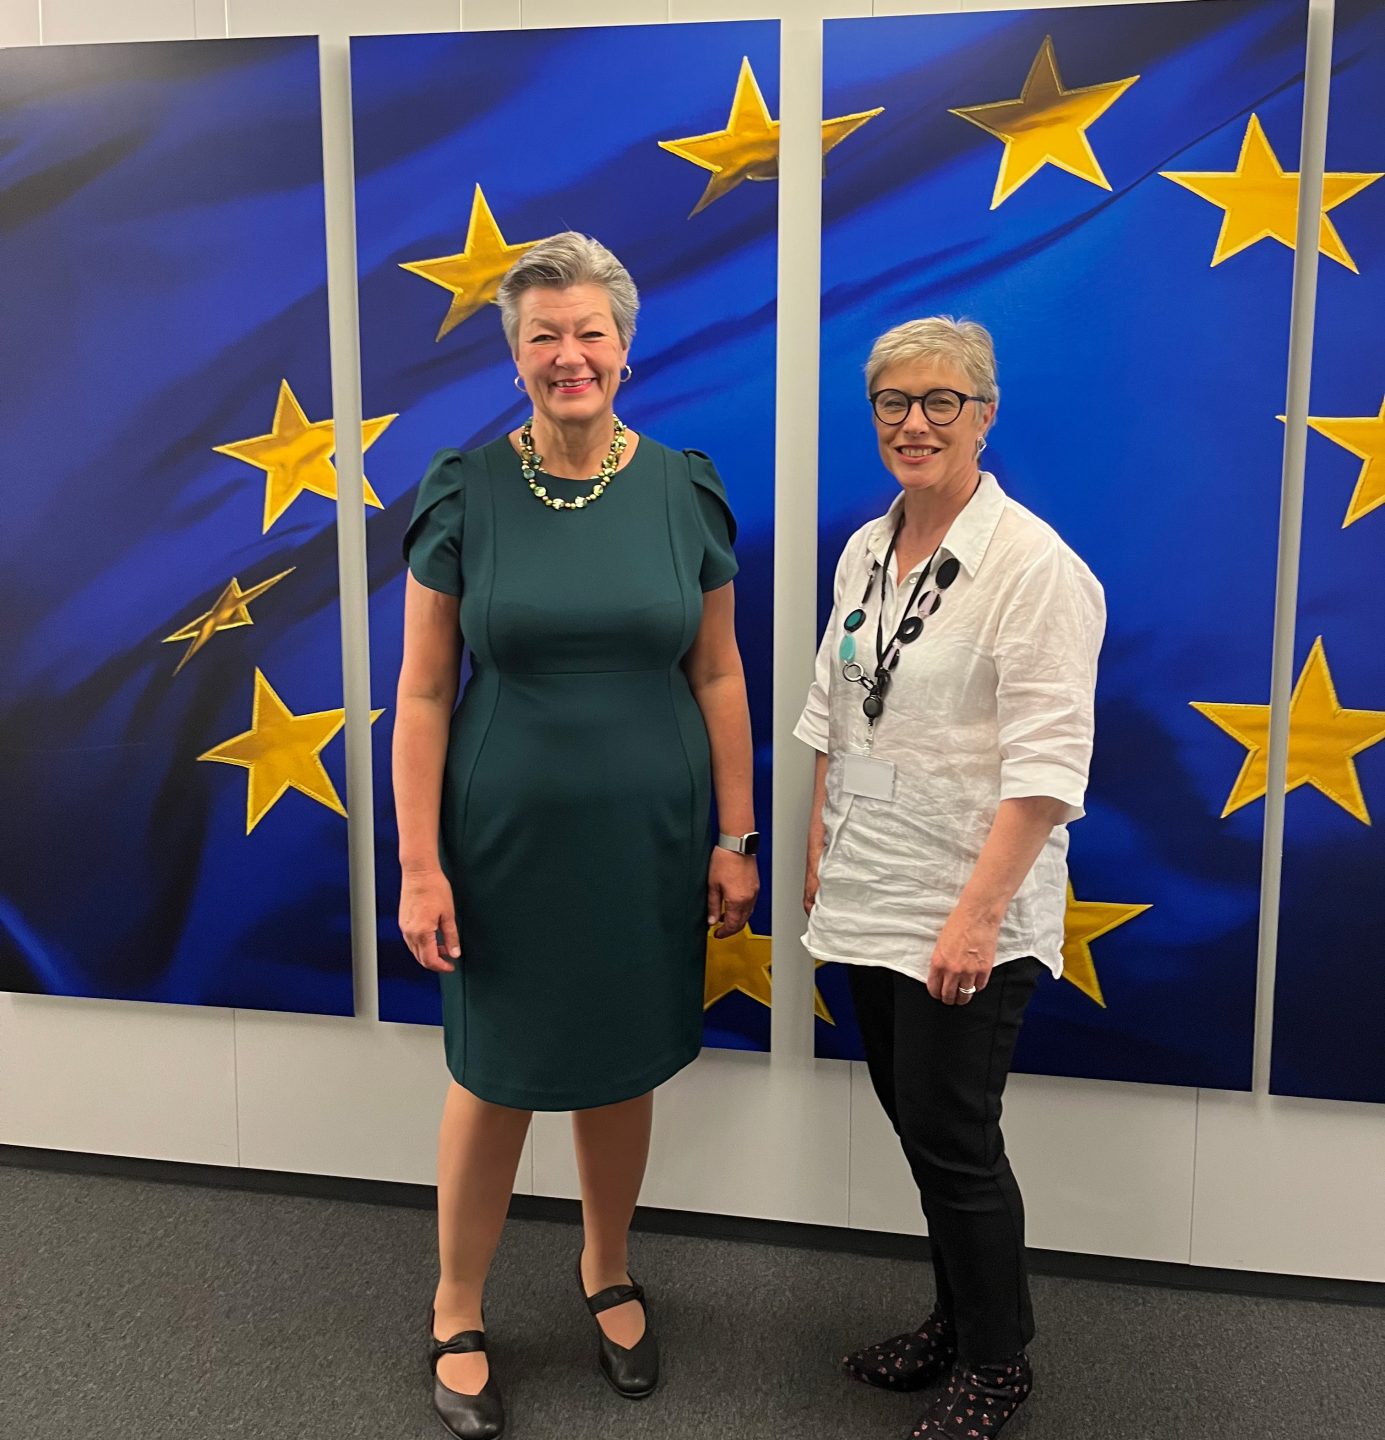 IWF CEO Susie Hargreaves OBE met with the European Commissioner for Home Affairs, Ylva Johansson, in Brussels in May